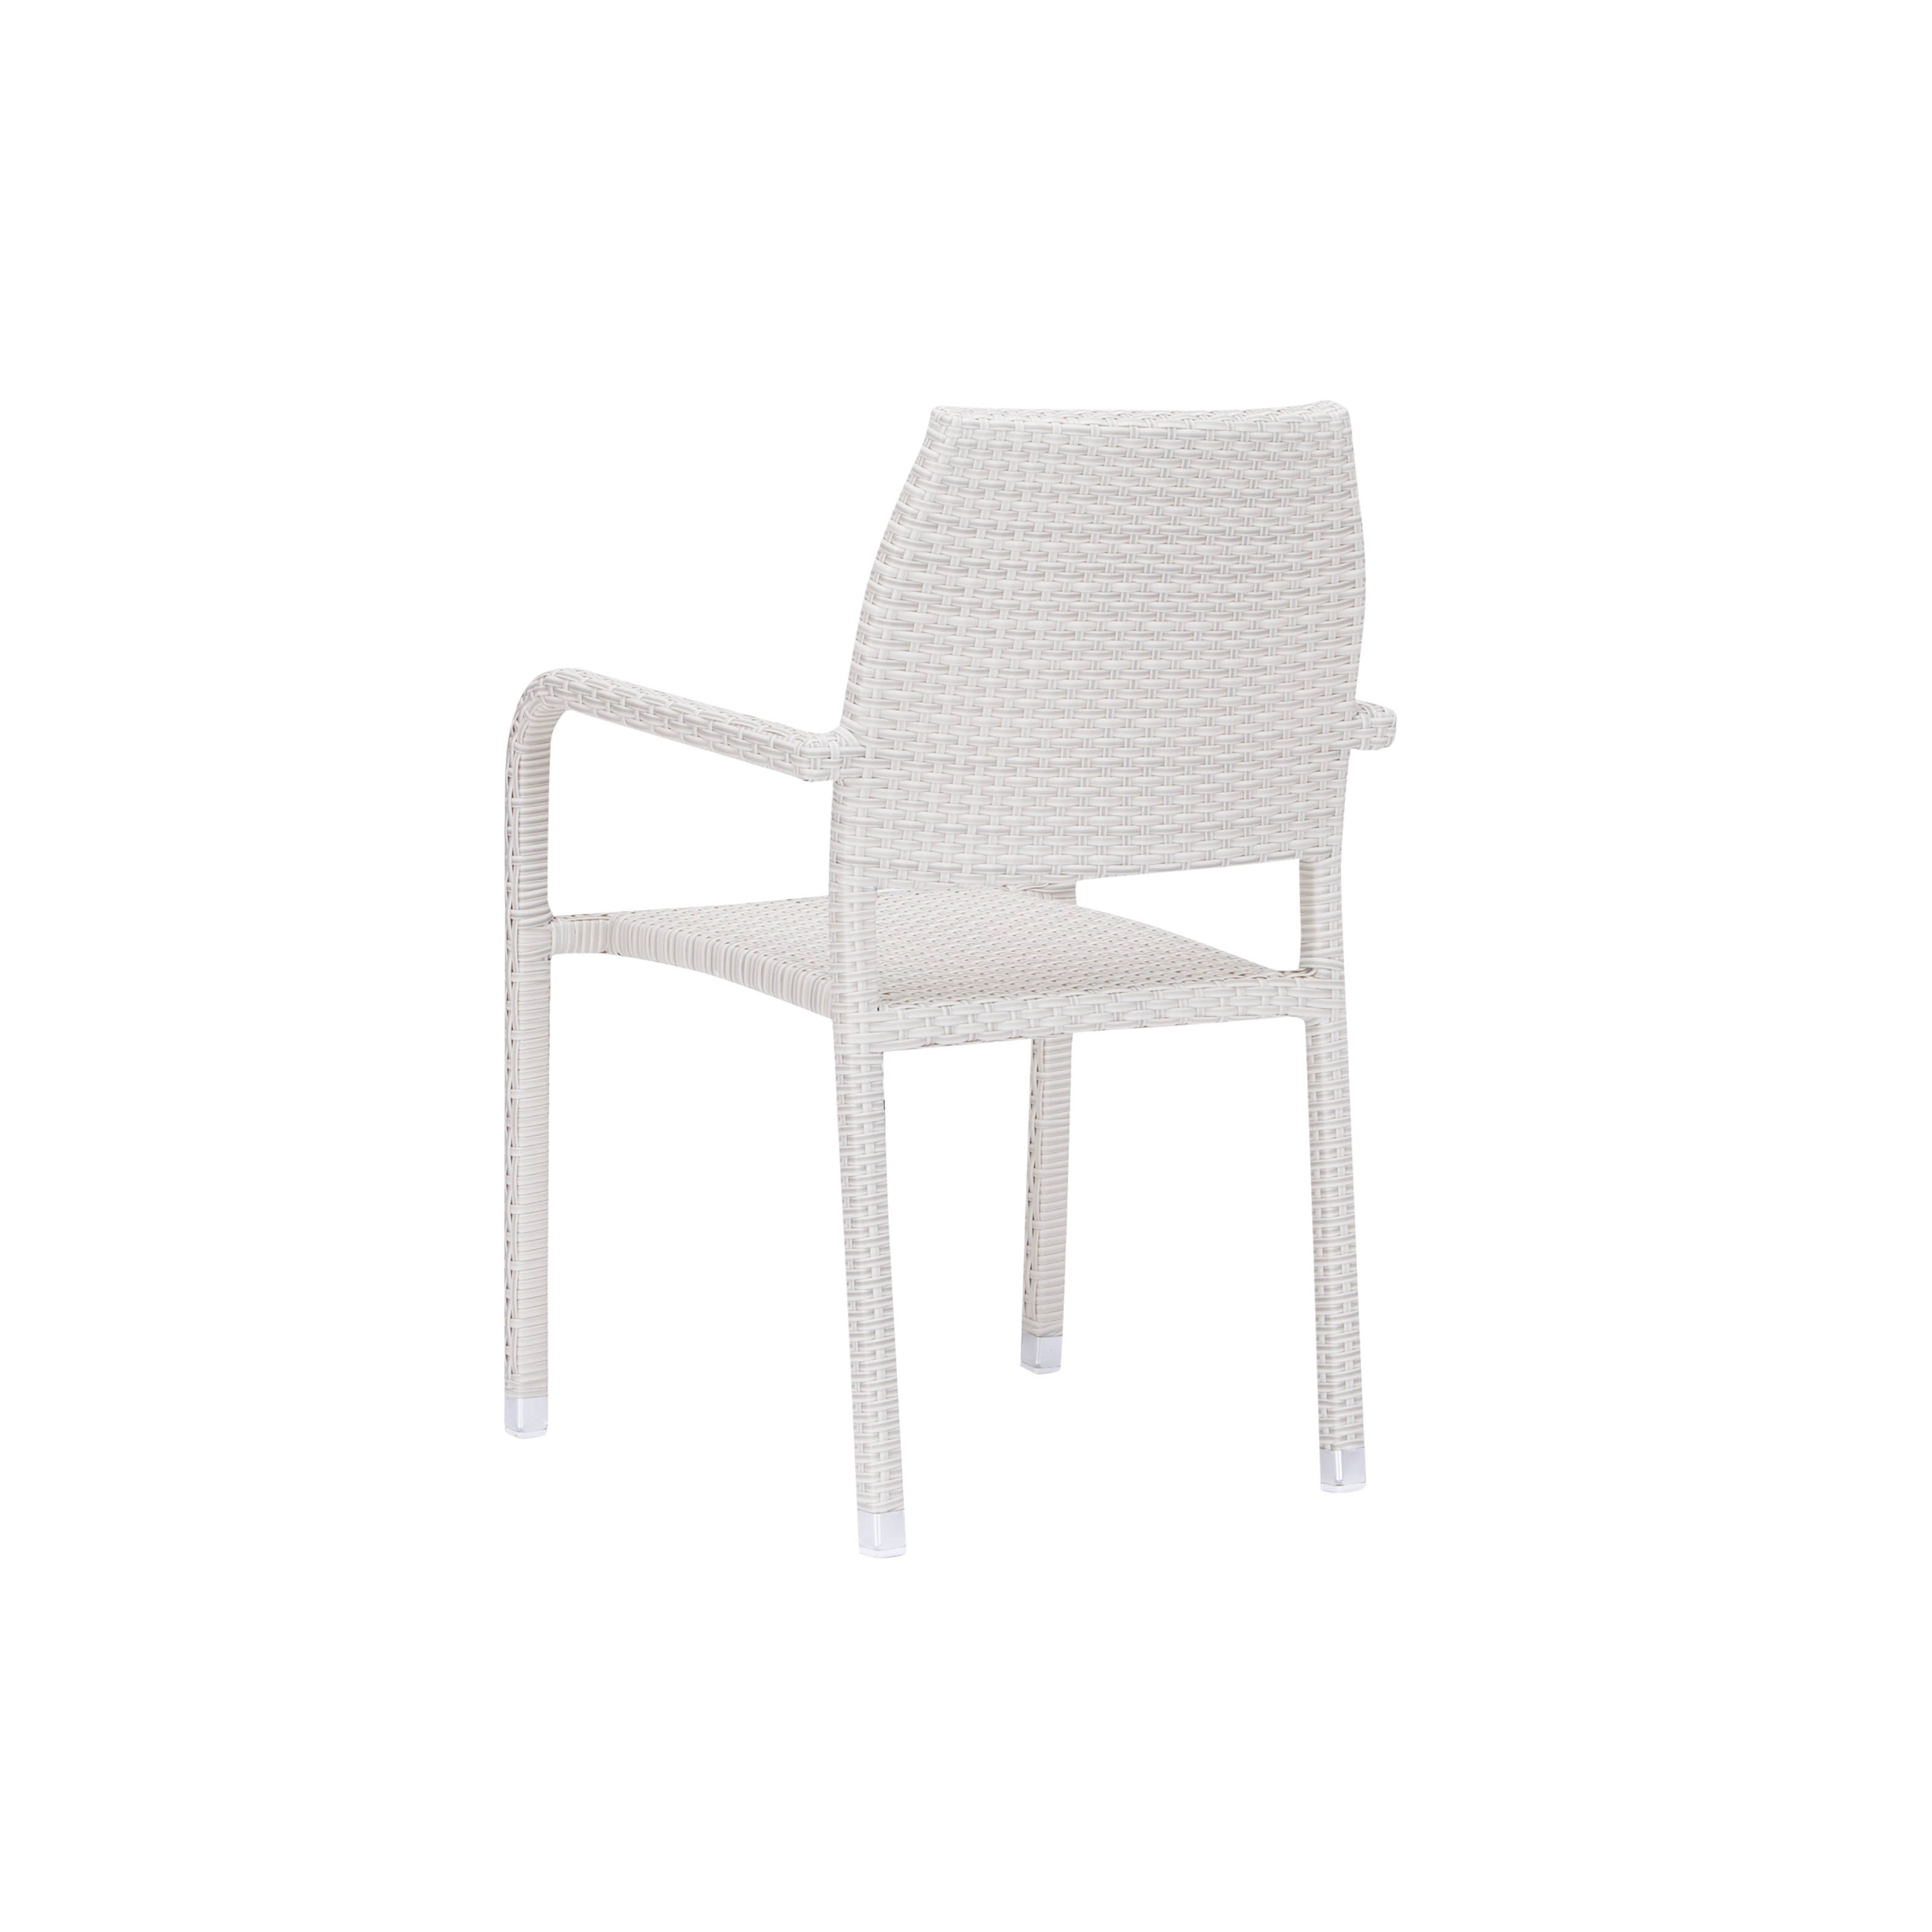 Sunny dining chair S3